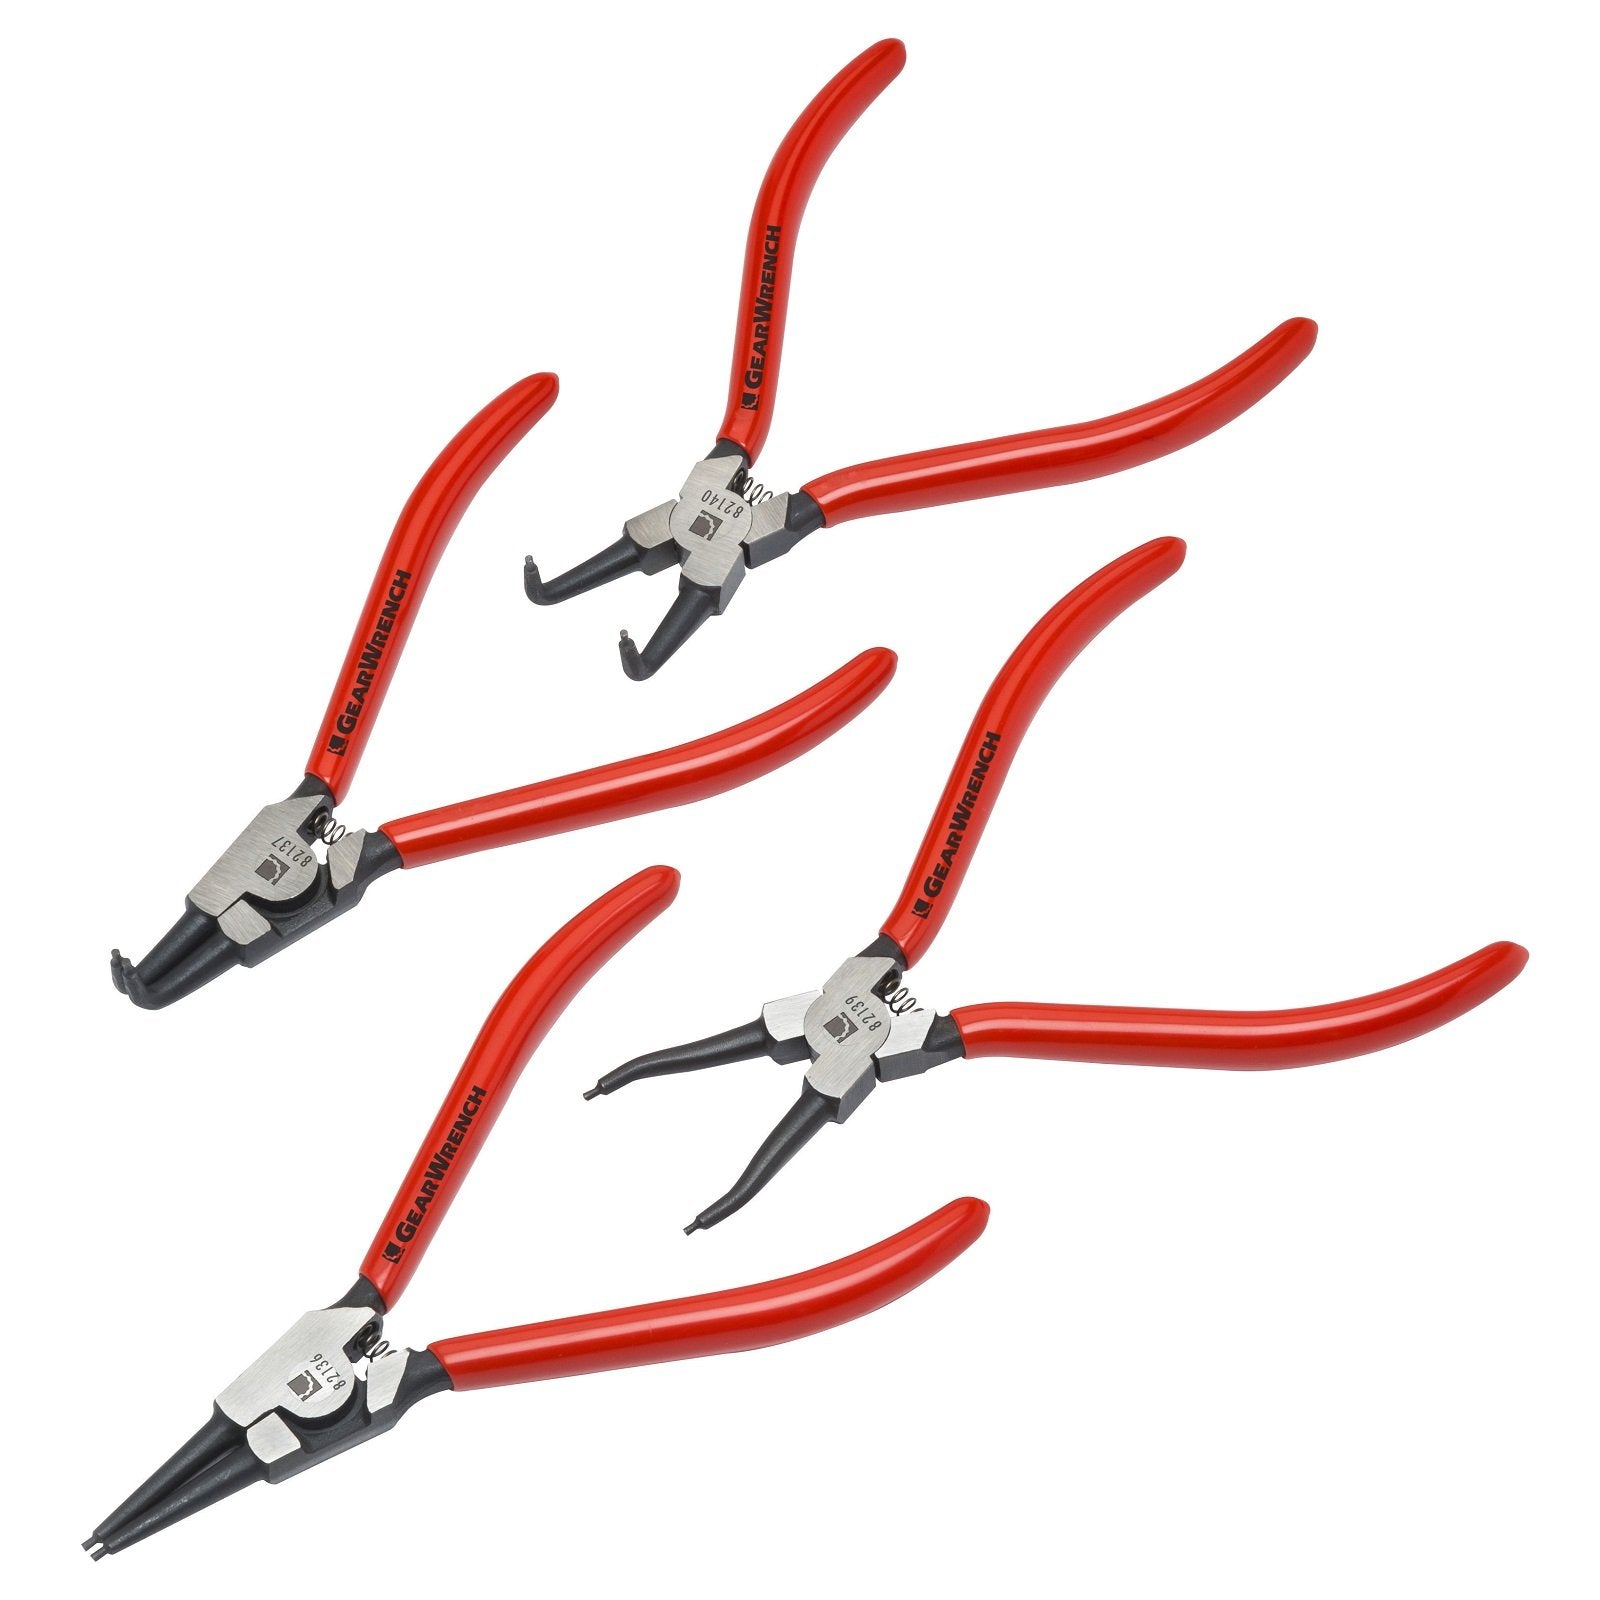 4Pce 7" Fixed Tip Internal & External Circlip / Snap Ring Plier Set 82150 by Gearwrench